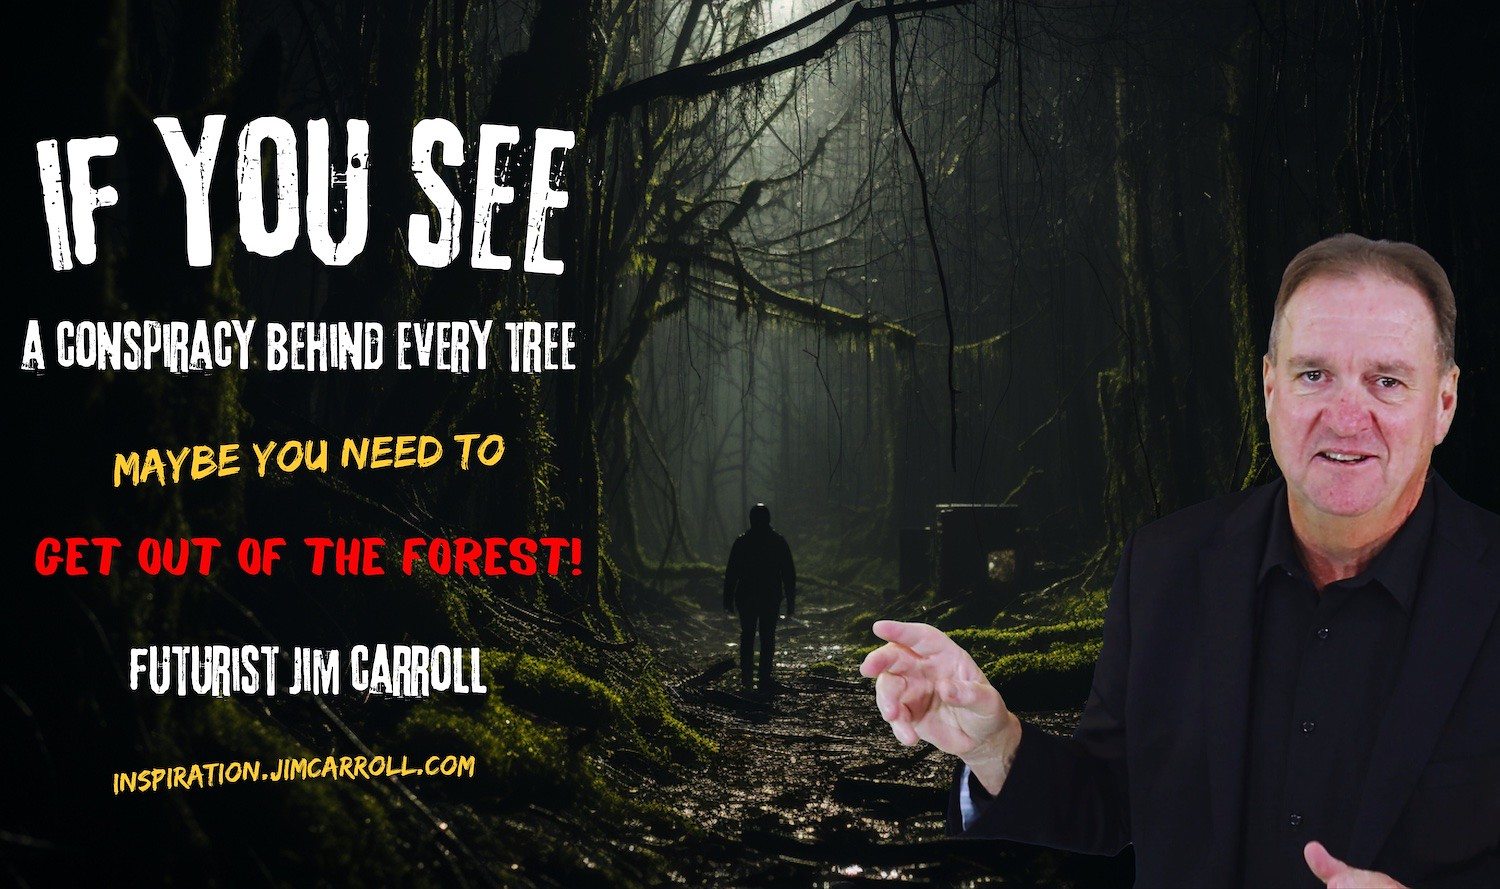 "If you see a conspiracy behind every tree maybe you need to get out of the forest!" - Futurist Jim Carroll